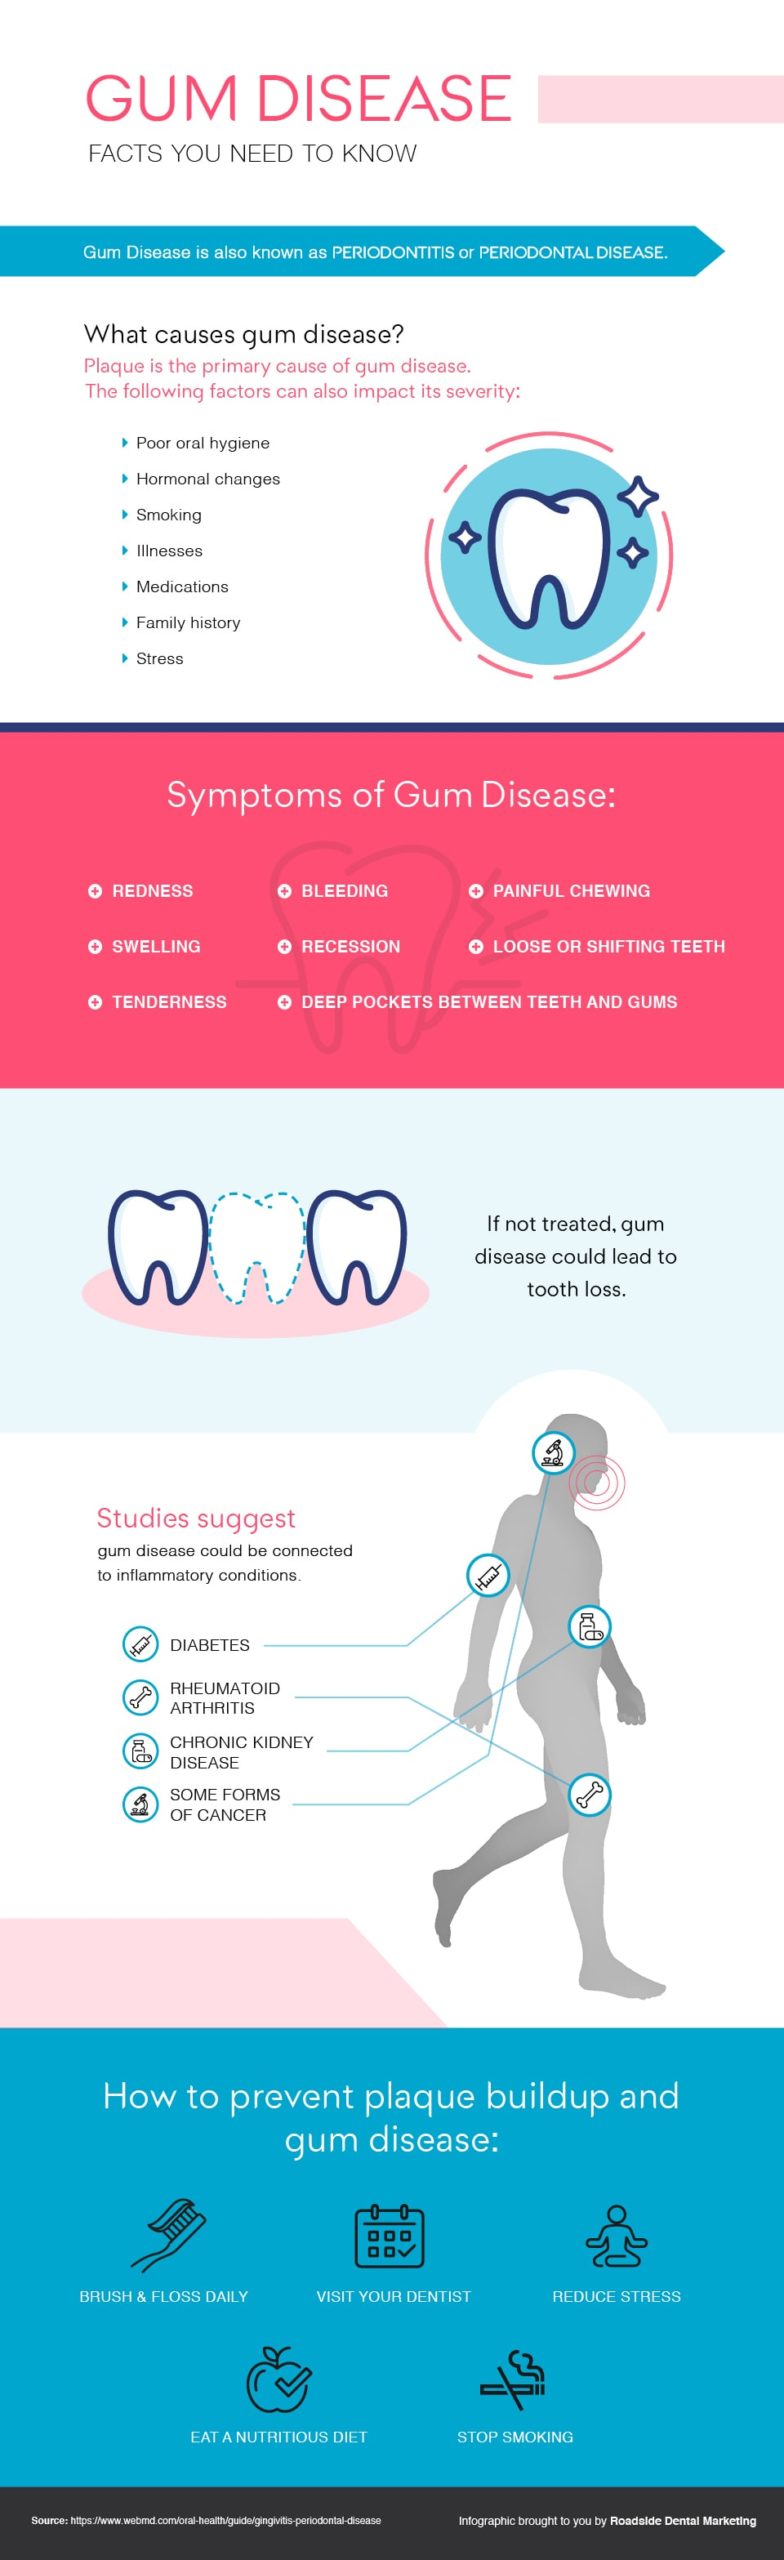 facts about tooth decay and gum disease infographic